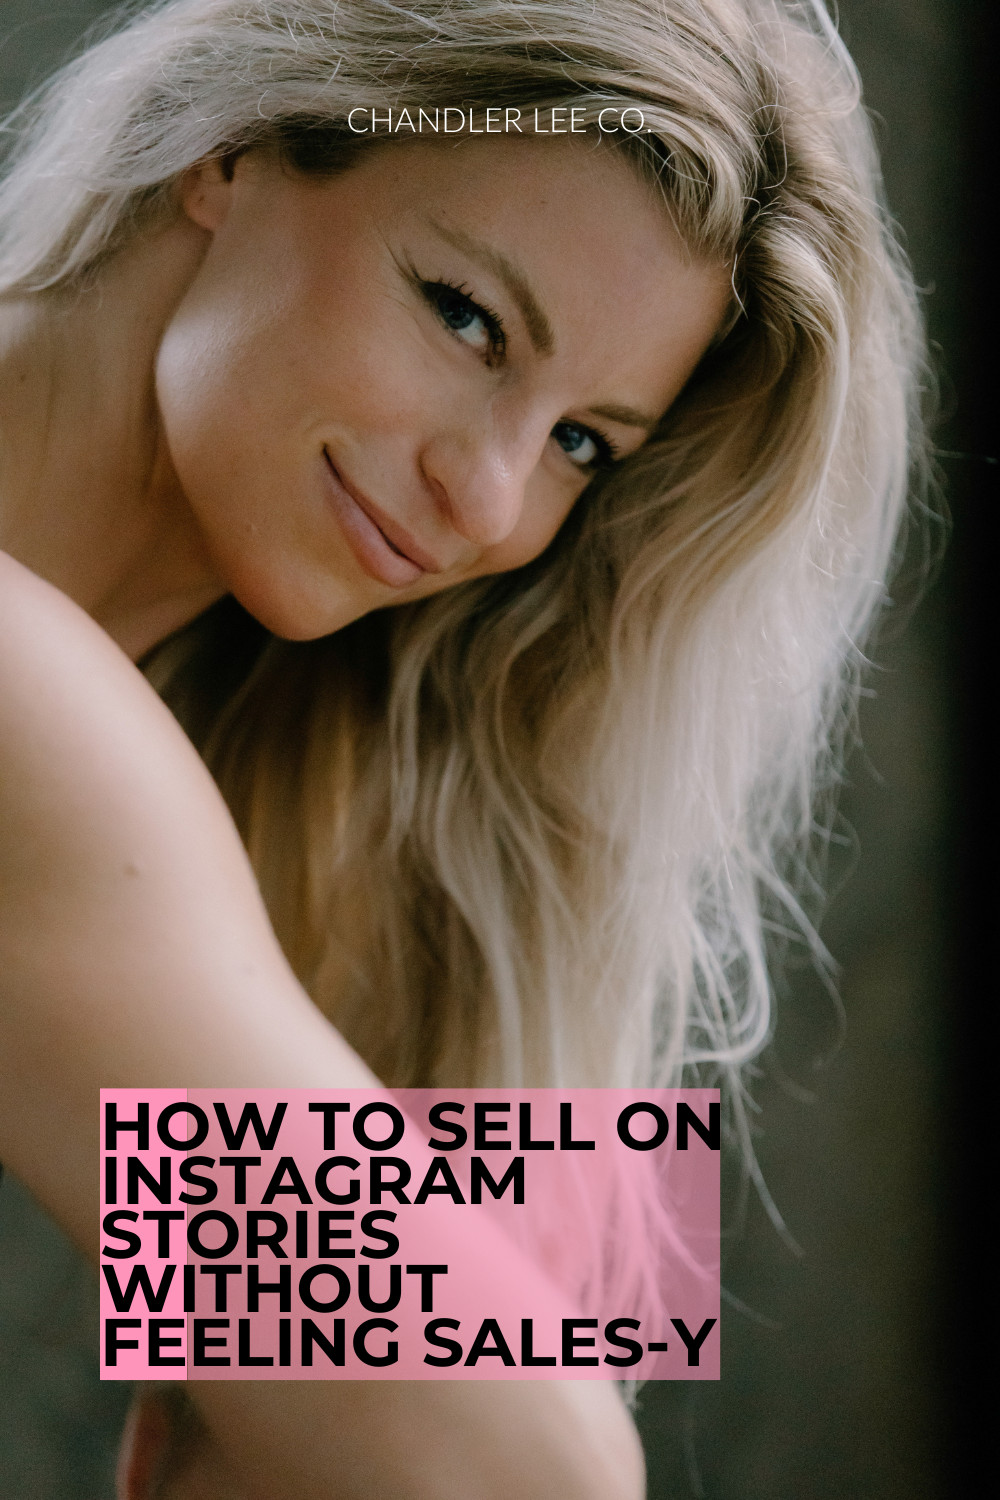 How to Sell on Instagram Stories Without Feeling Sales-y